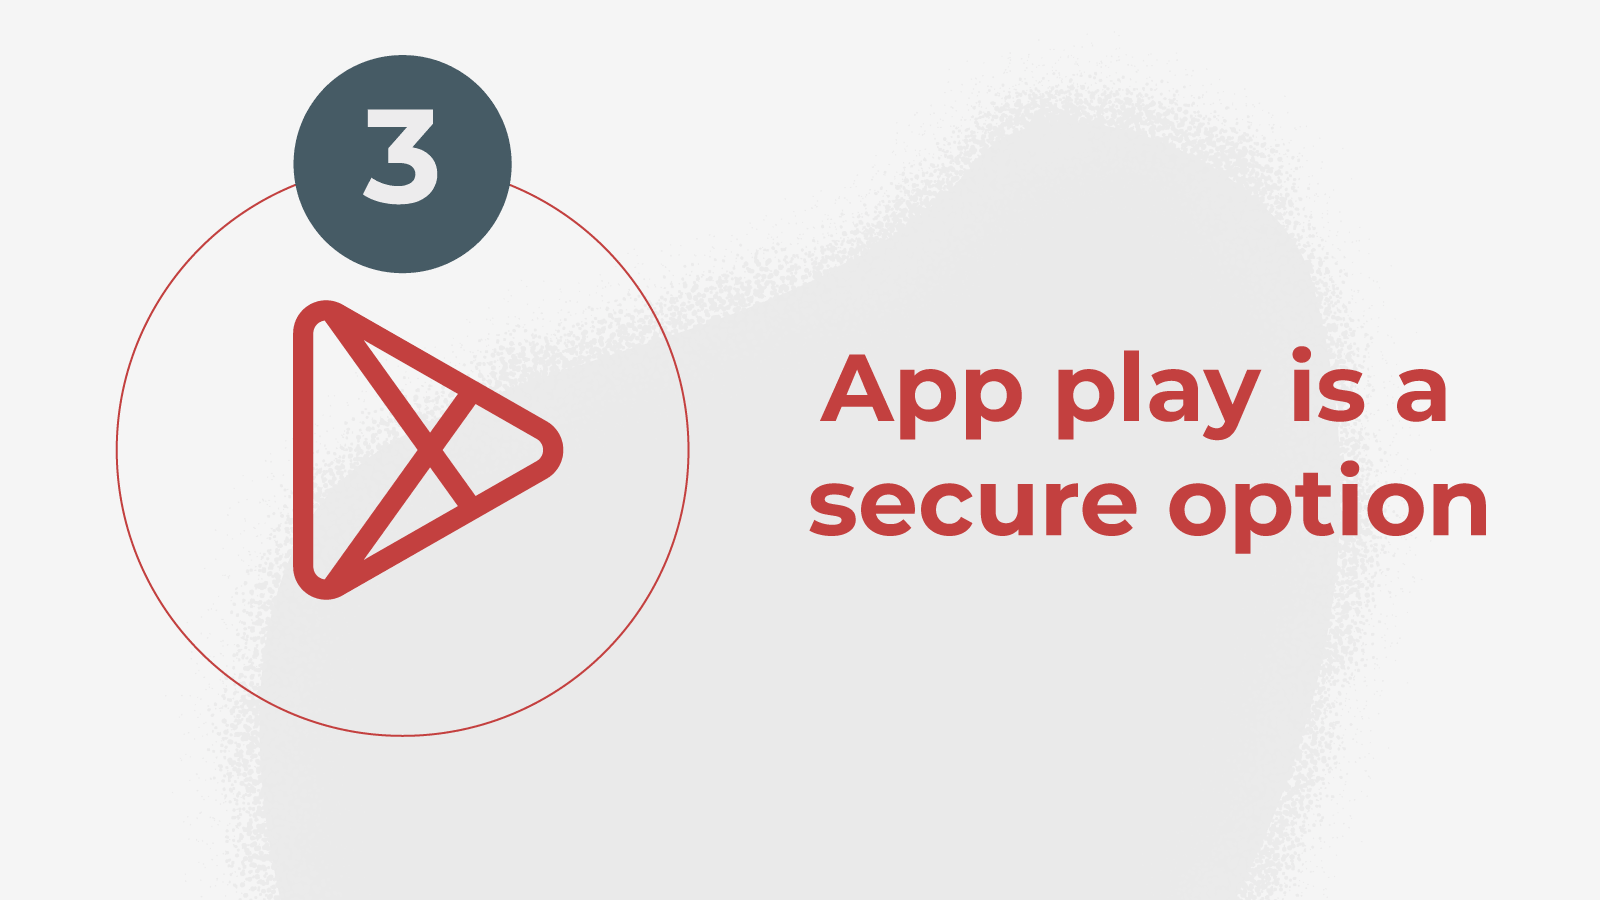 3.App play is a secure option